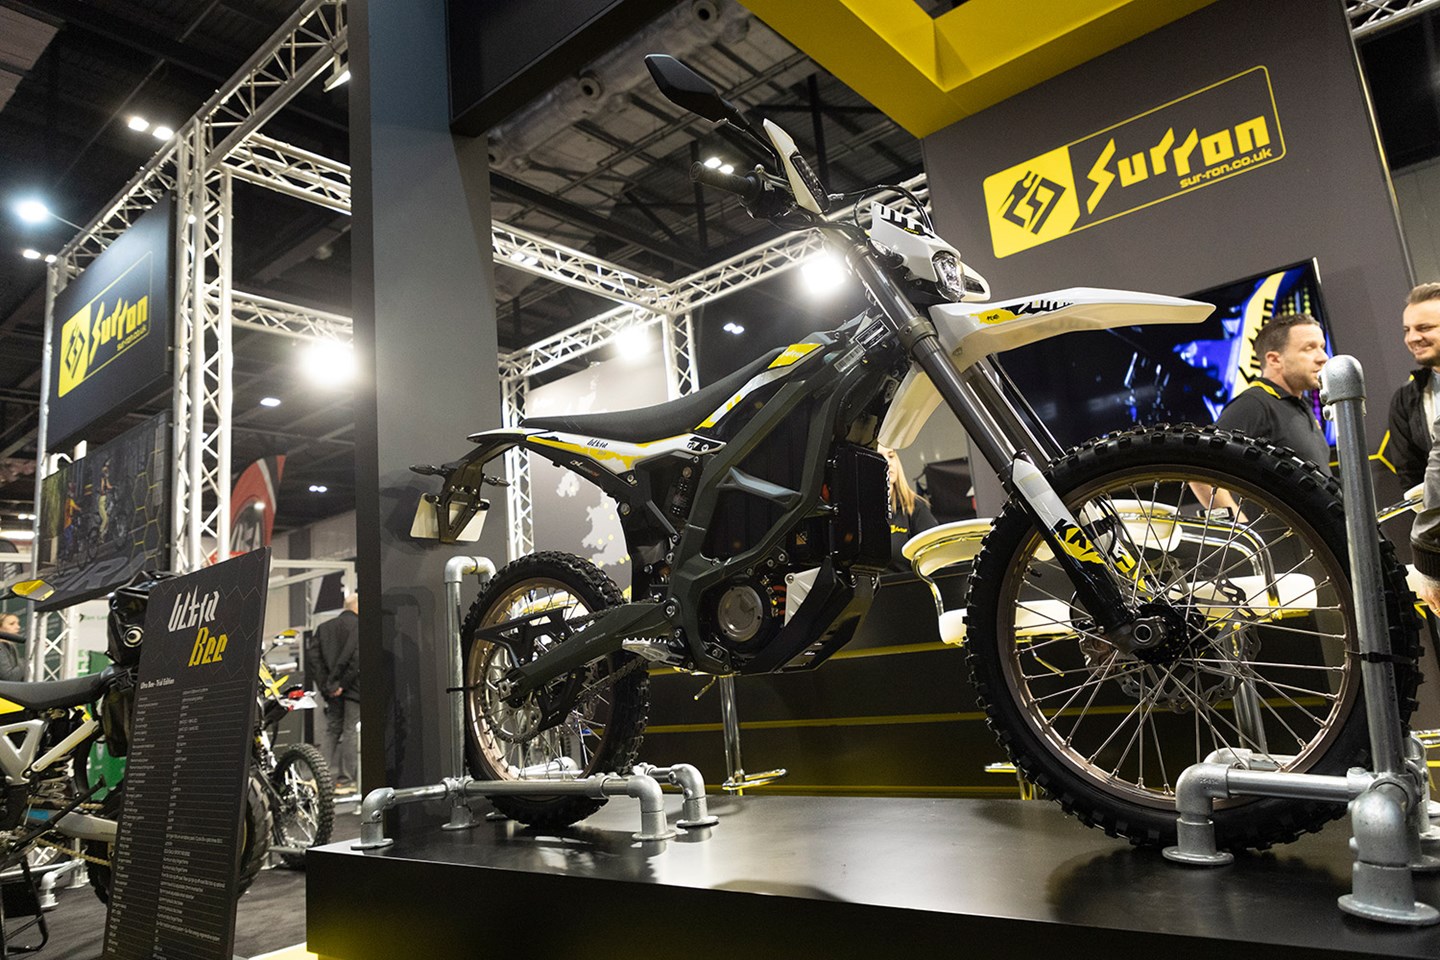 Creating a buzz: Sur-Ron Ultra Bee mixes off-road poise with city skills